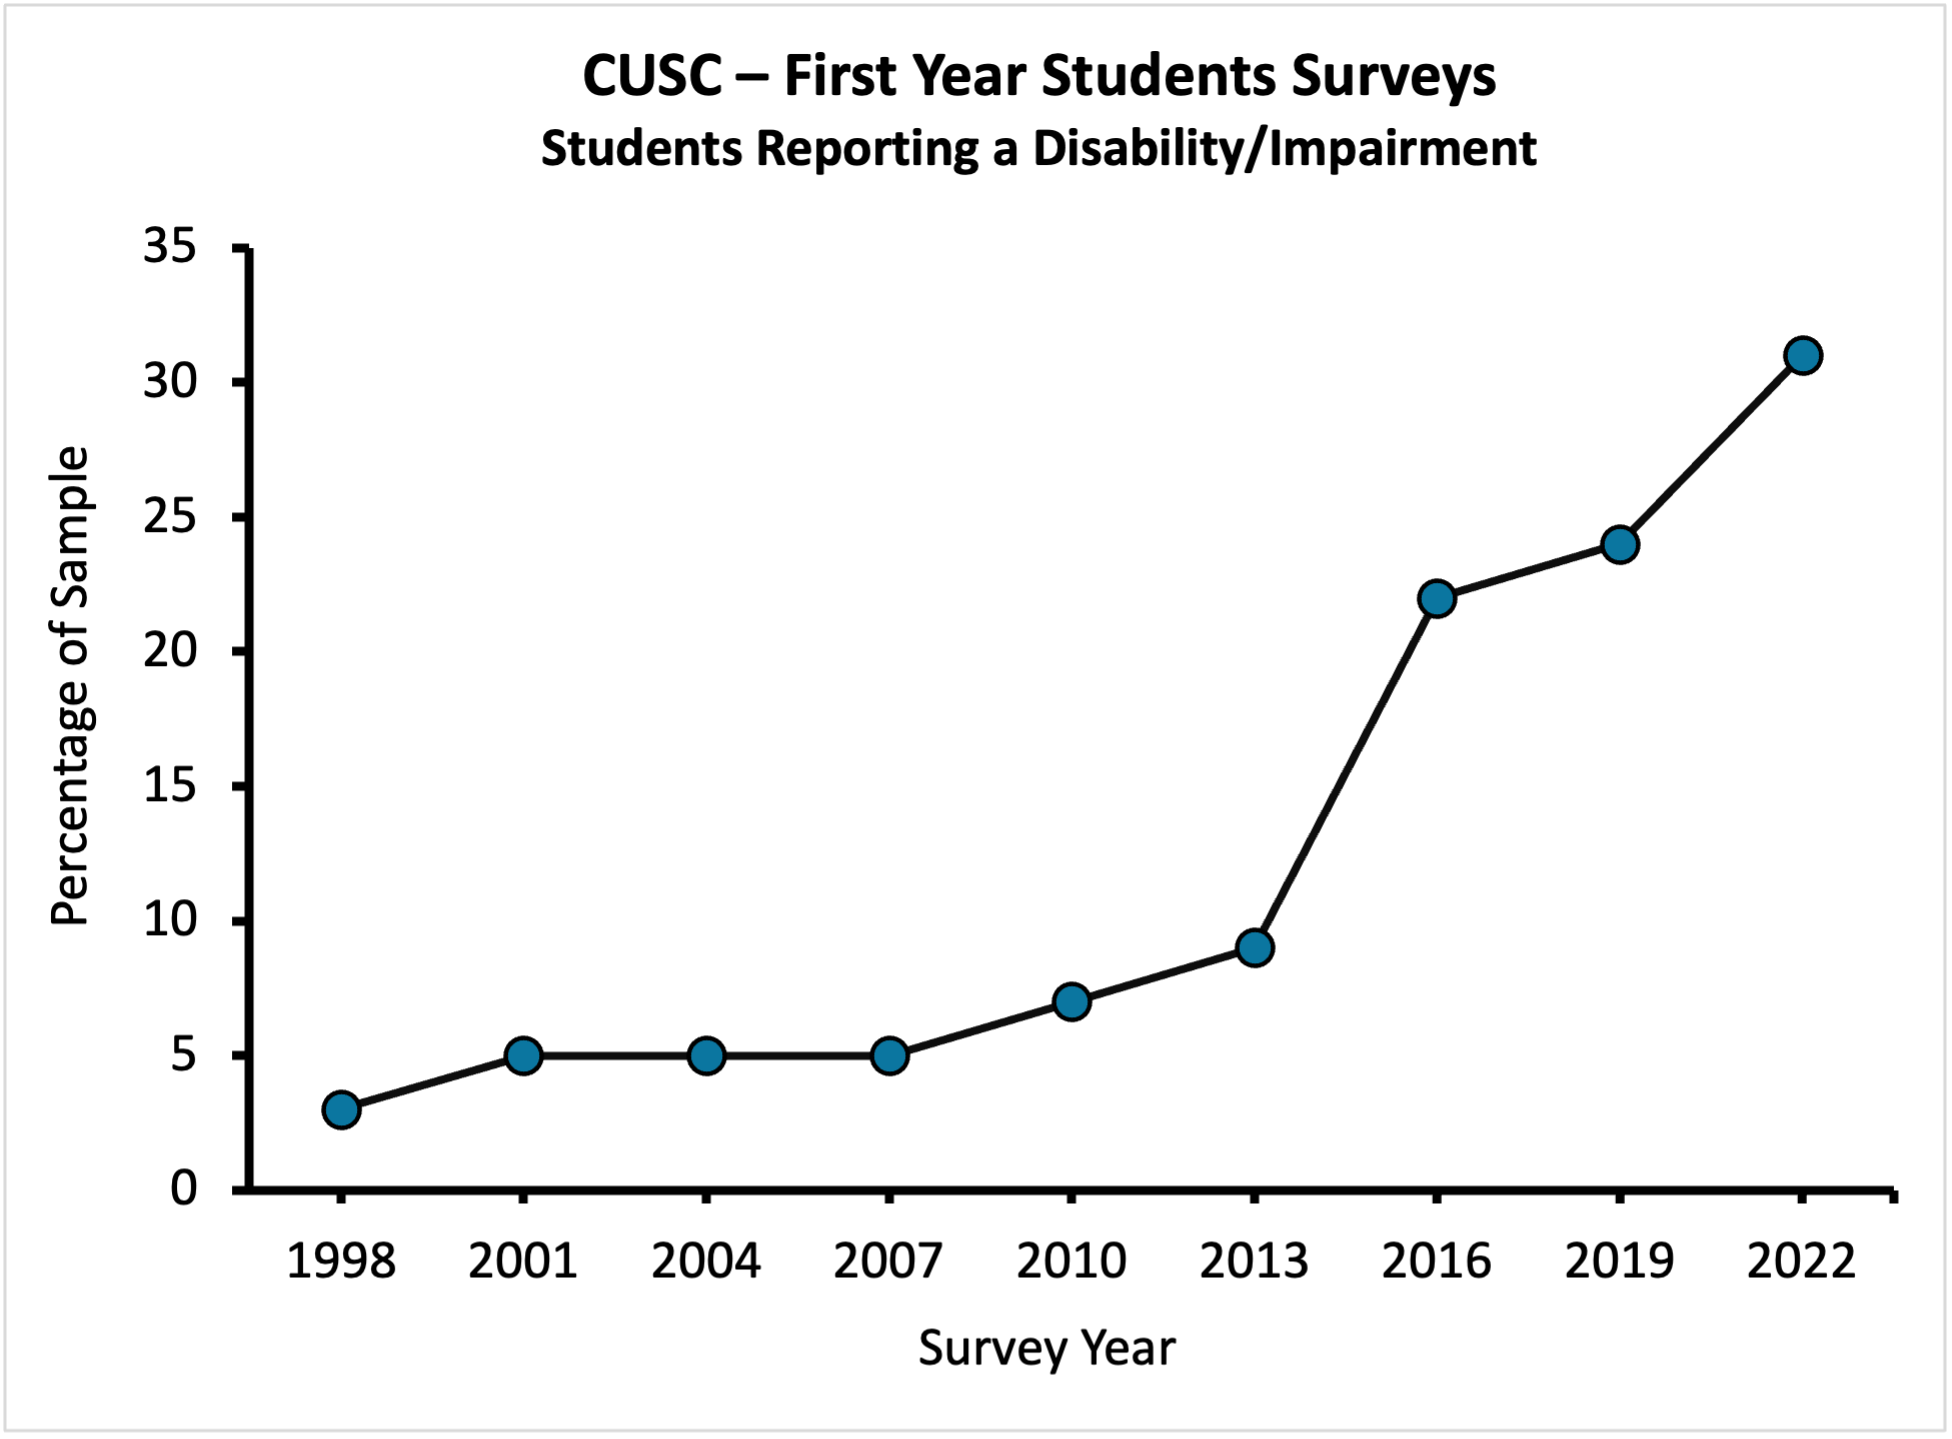 Line graph showing that the percentage of first year students has significantly increased from 1998 until 2022. Rates in 1998 are just under 5% whereas in 2022, they are closer to 30%